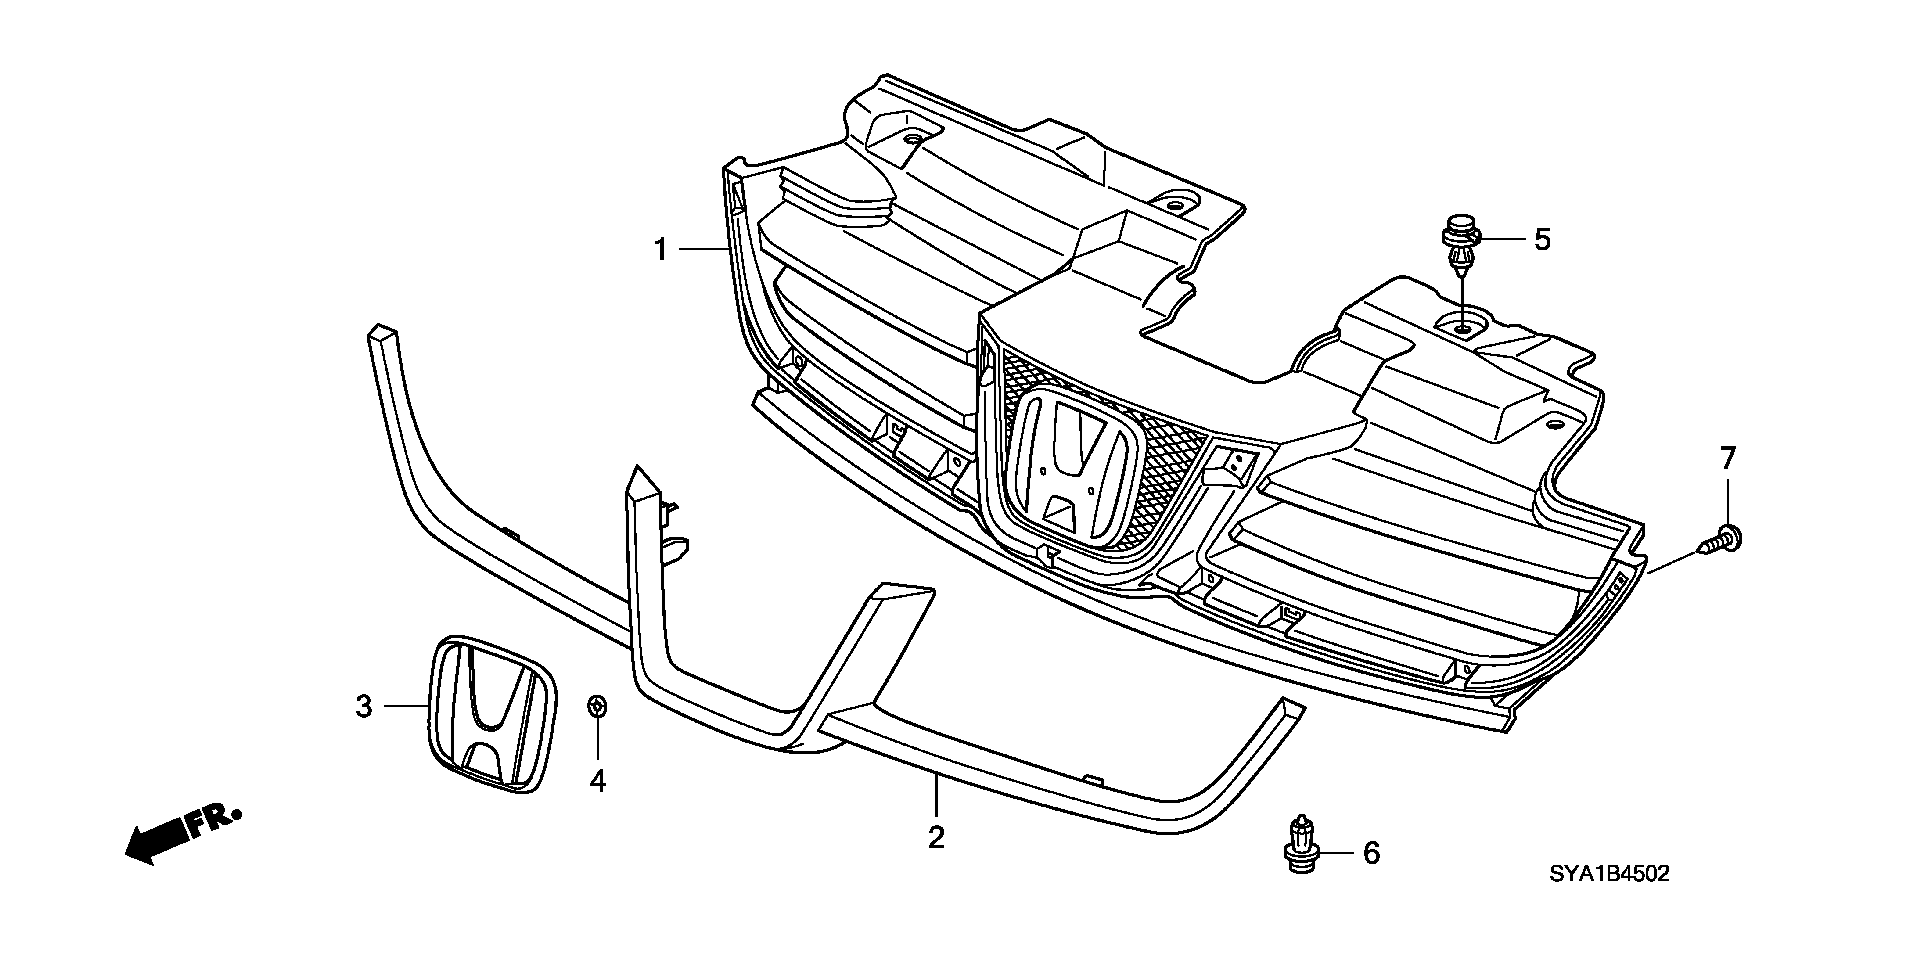 FRONT GRILLE(3)